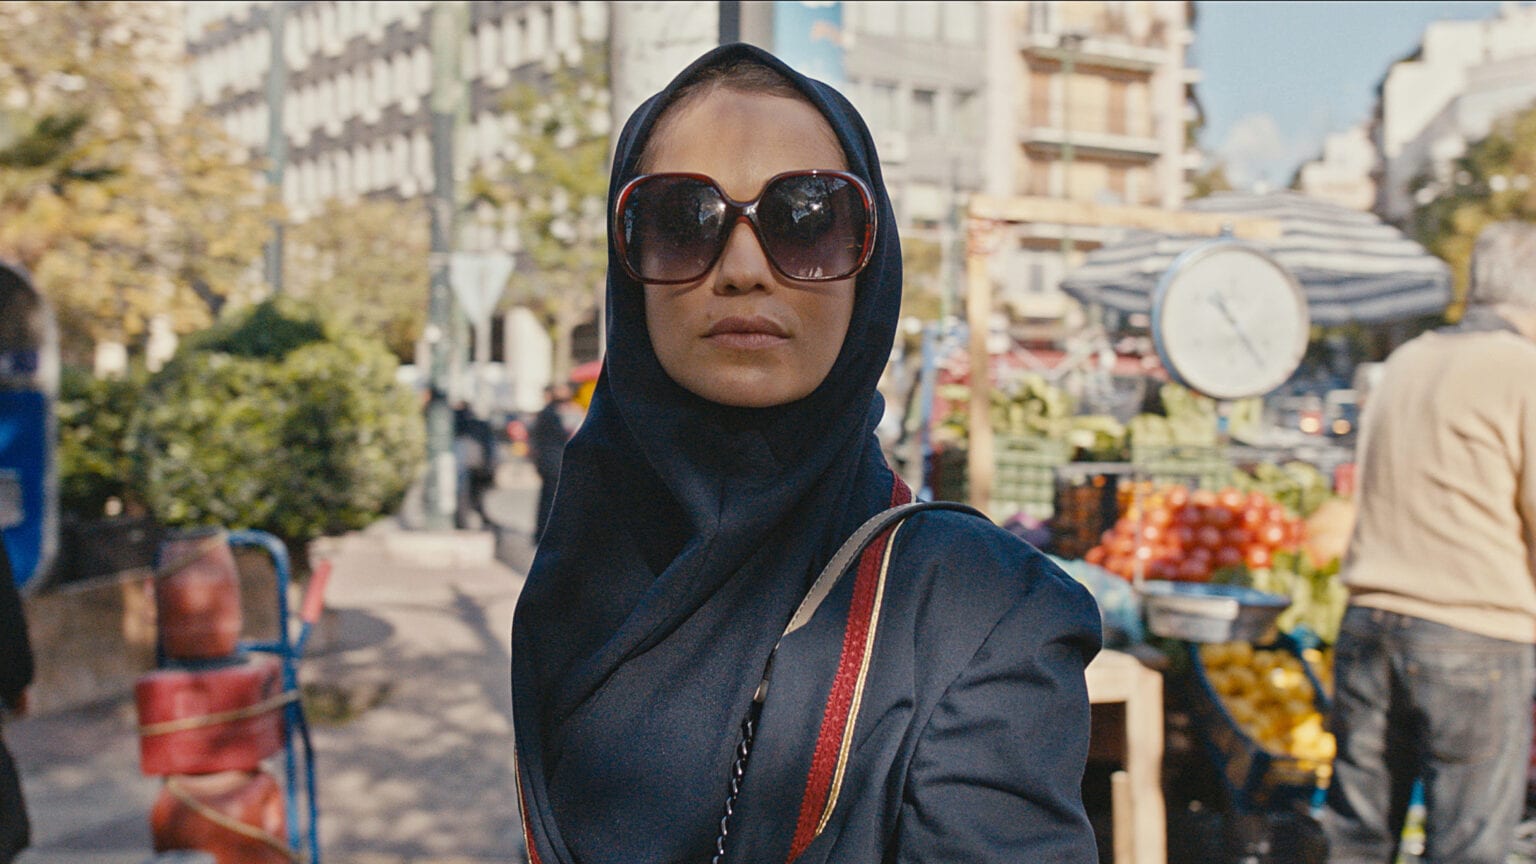 Tehran is an action-spy series coming soon to Apple TV+